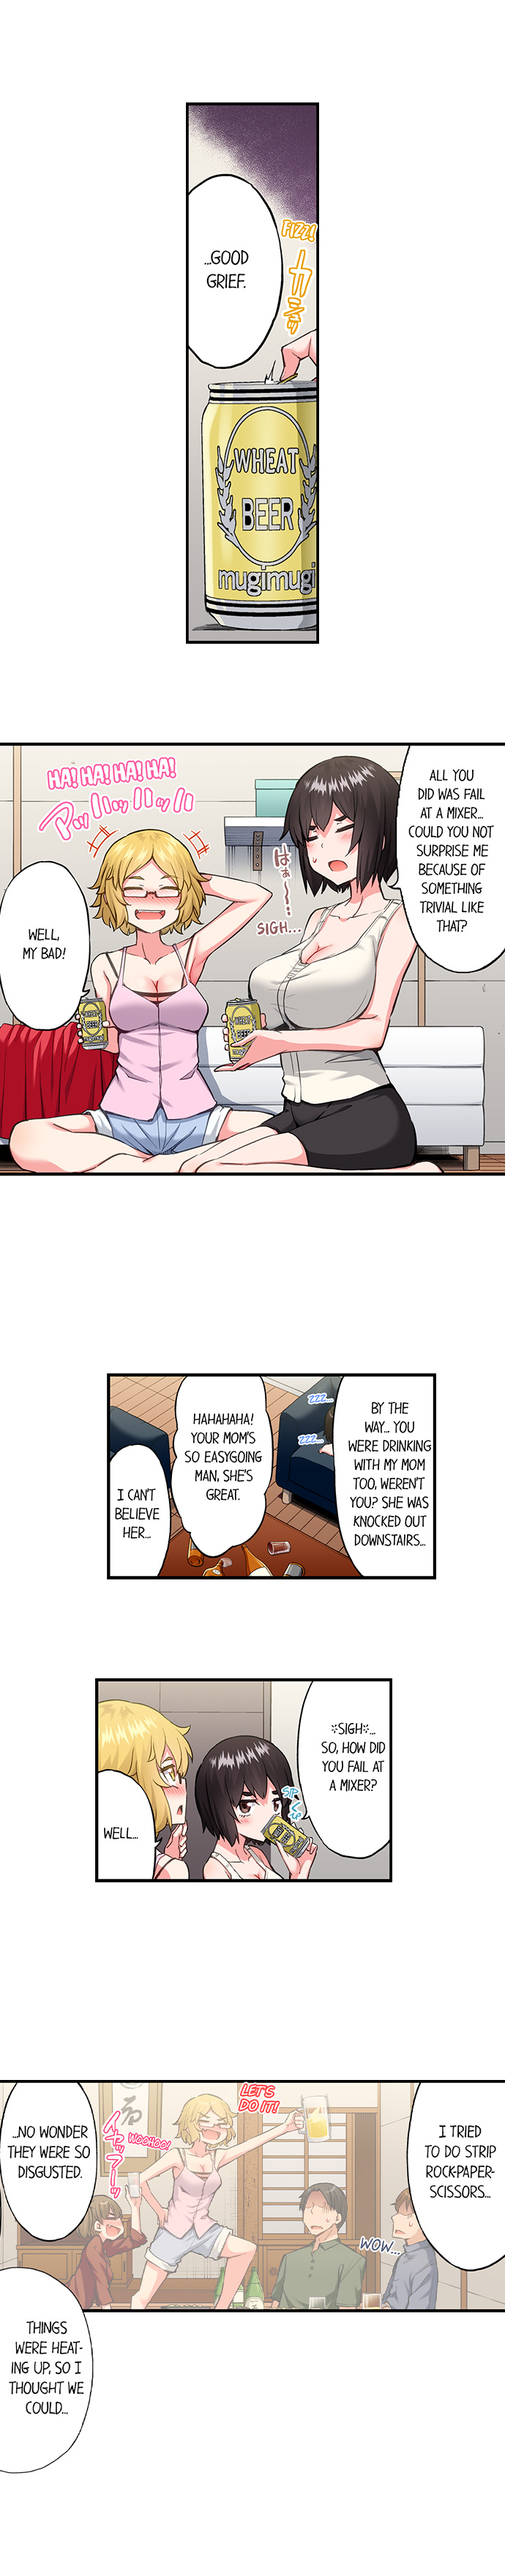 Traditional Job of Washing Girls’ Body - Chapter 196 Page 4